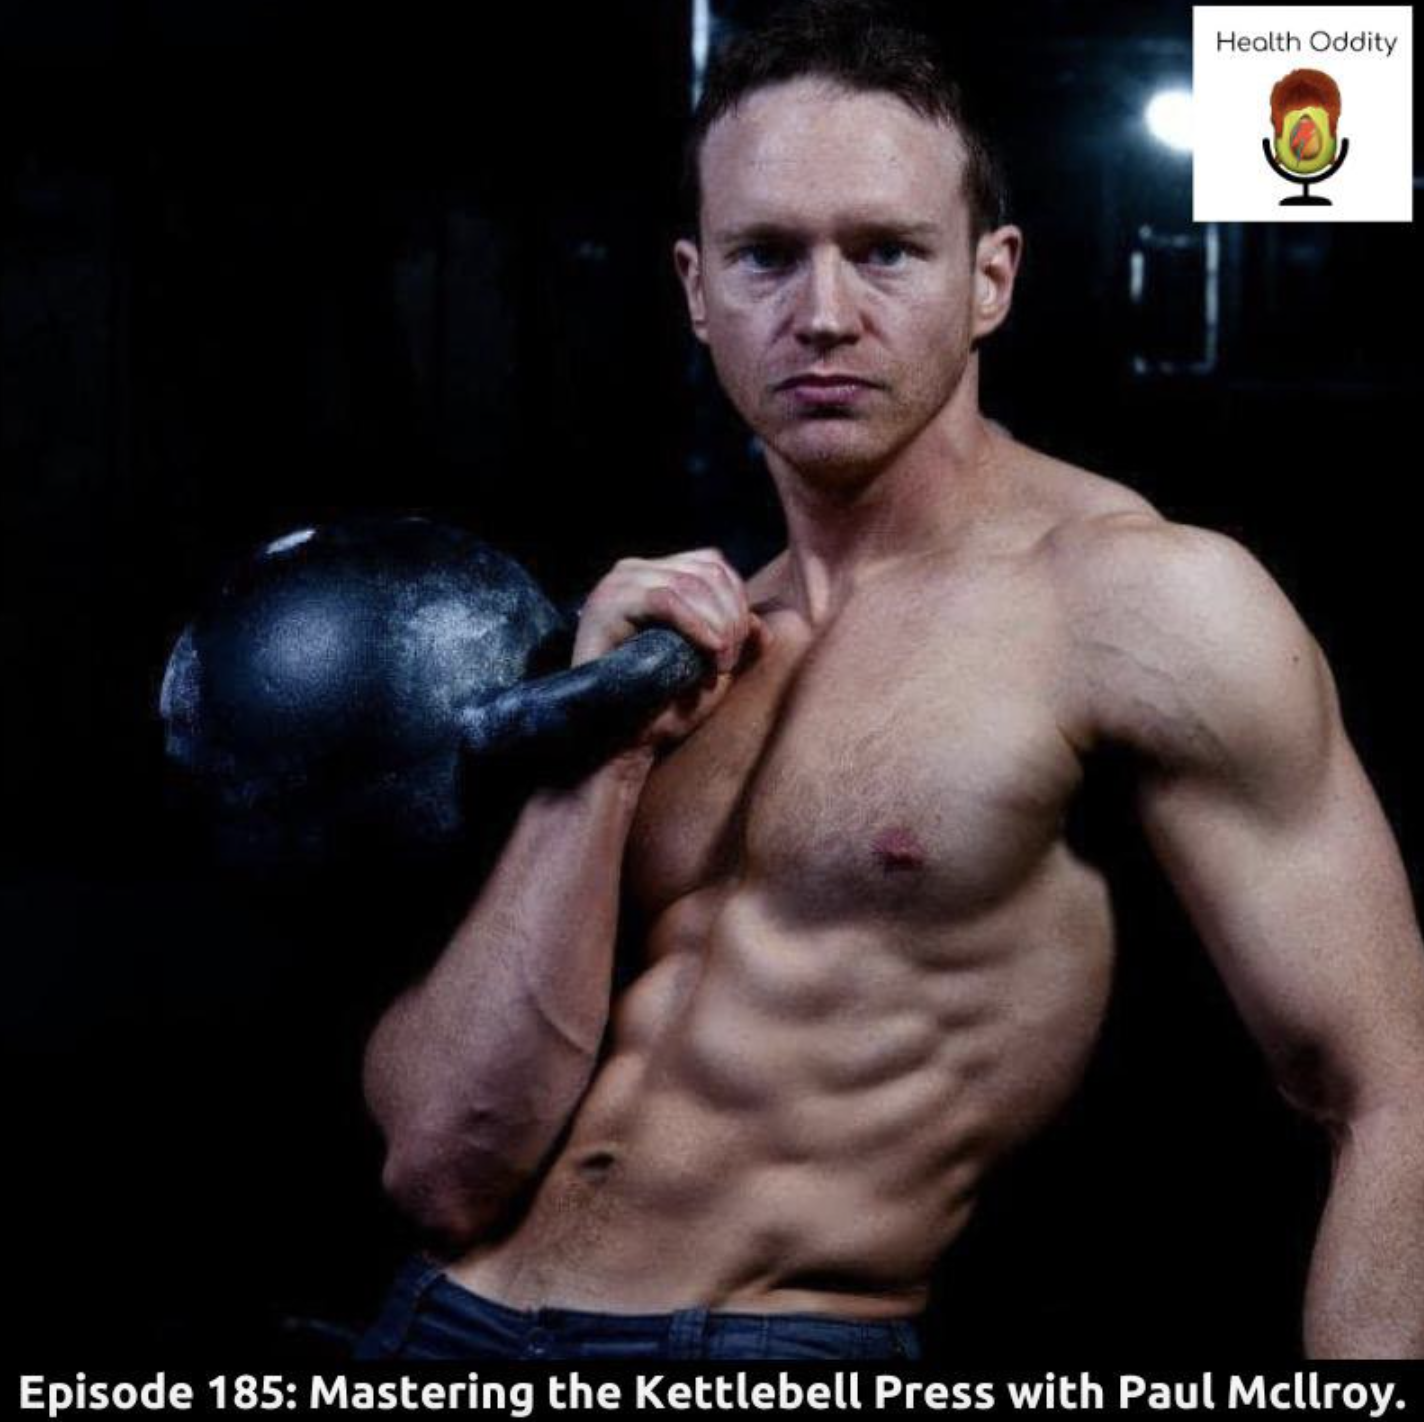 #185 Mastering the Kettlebell Press with Paul Mcllroy